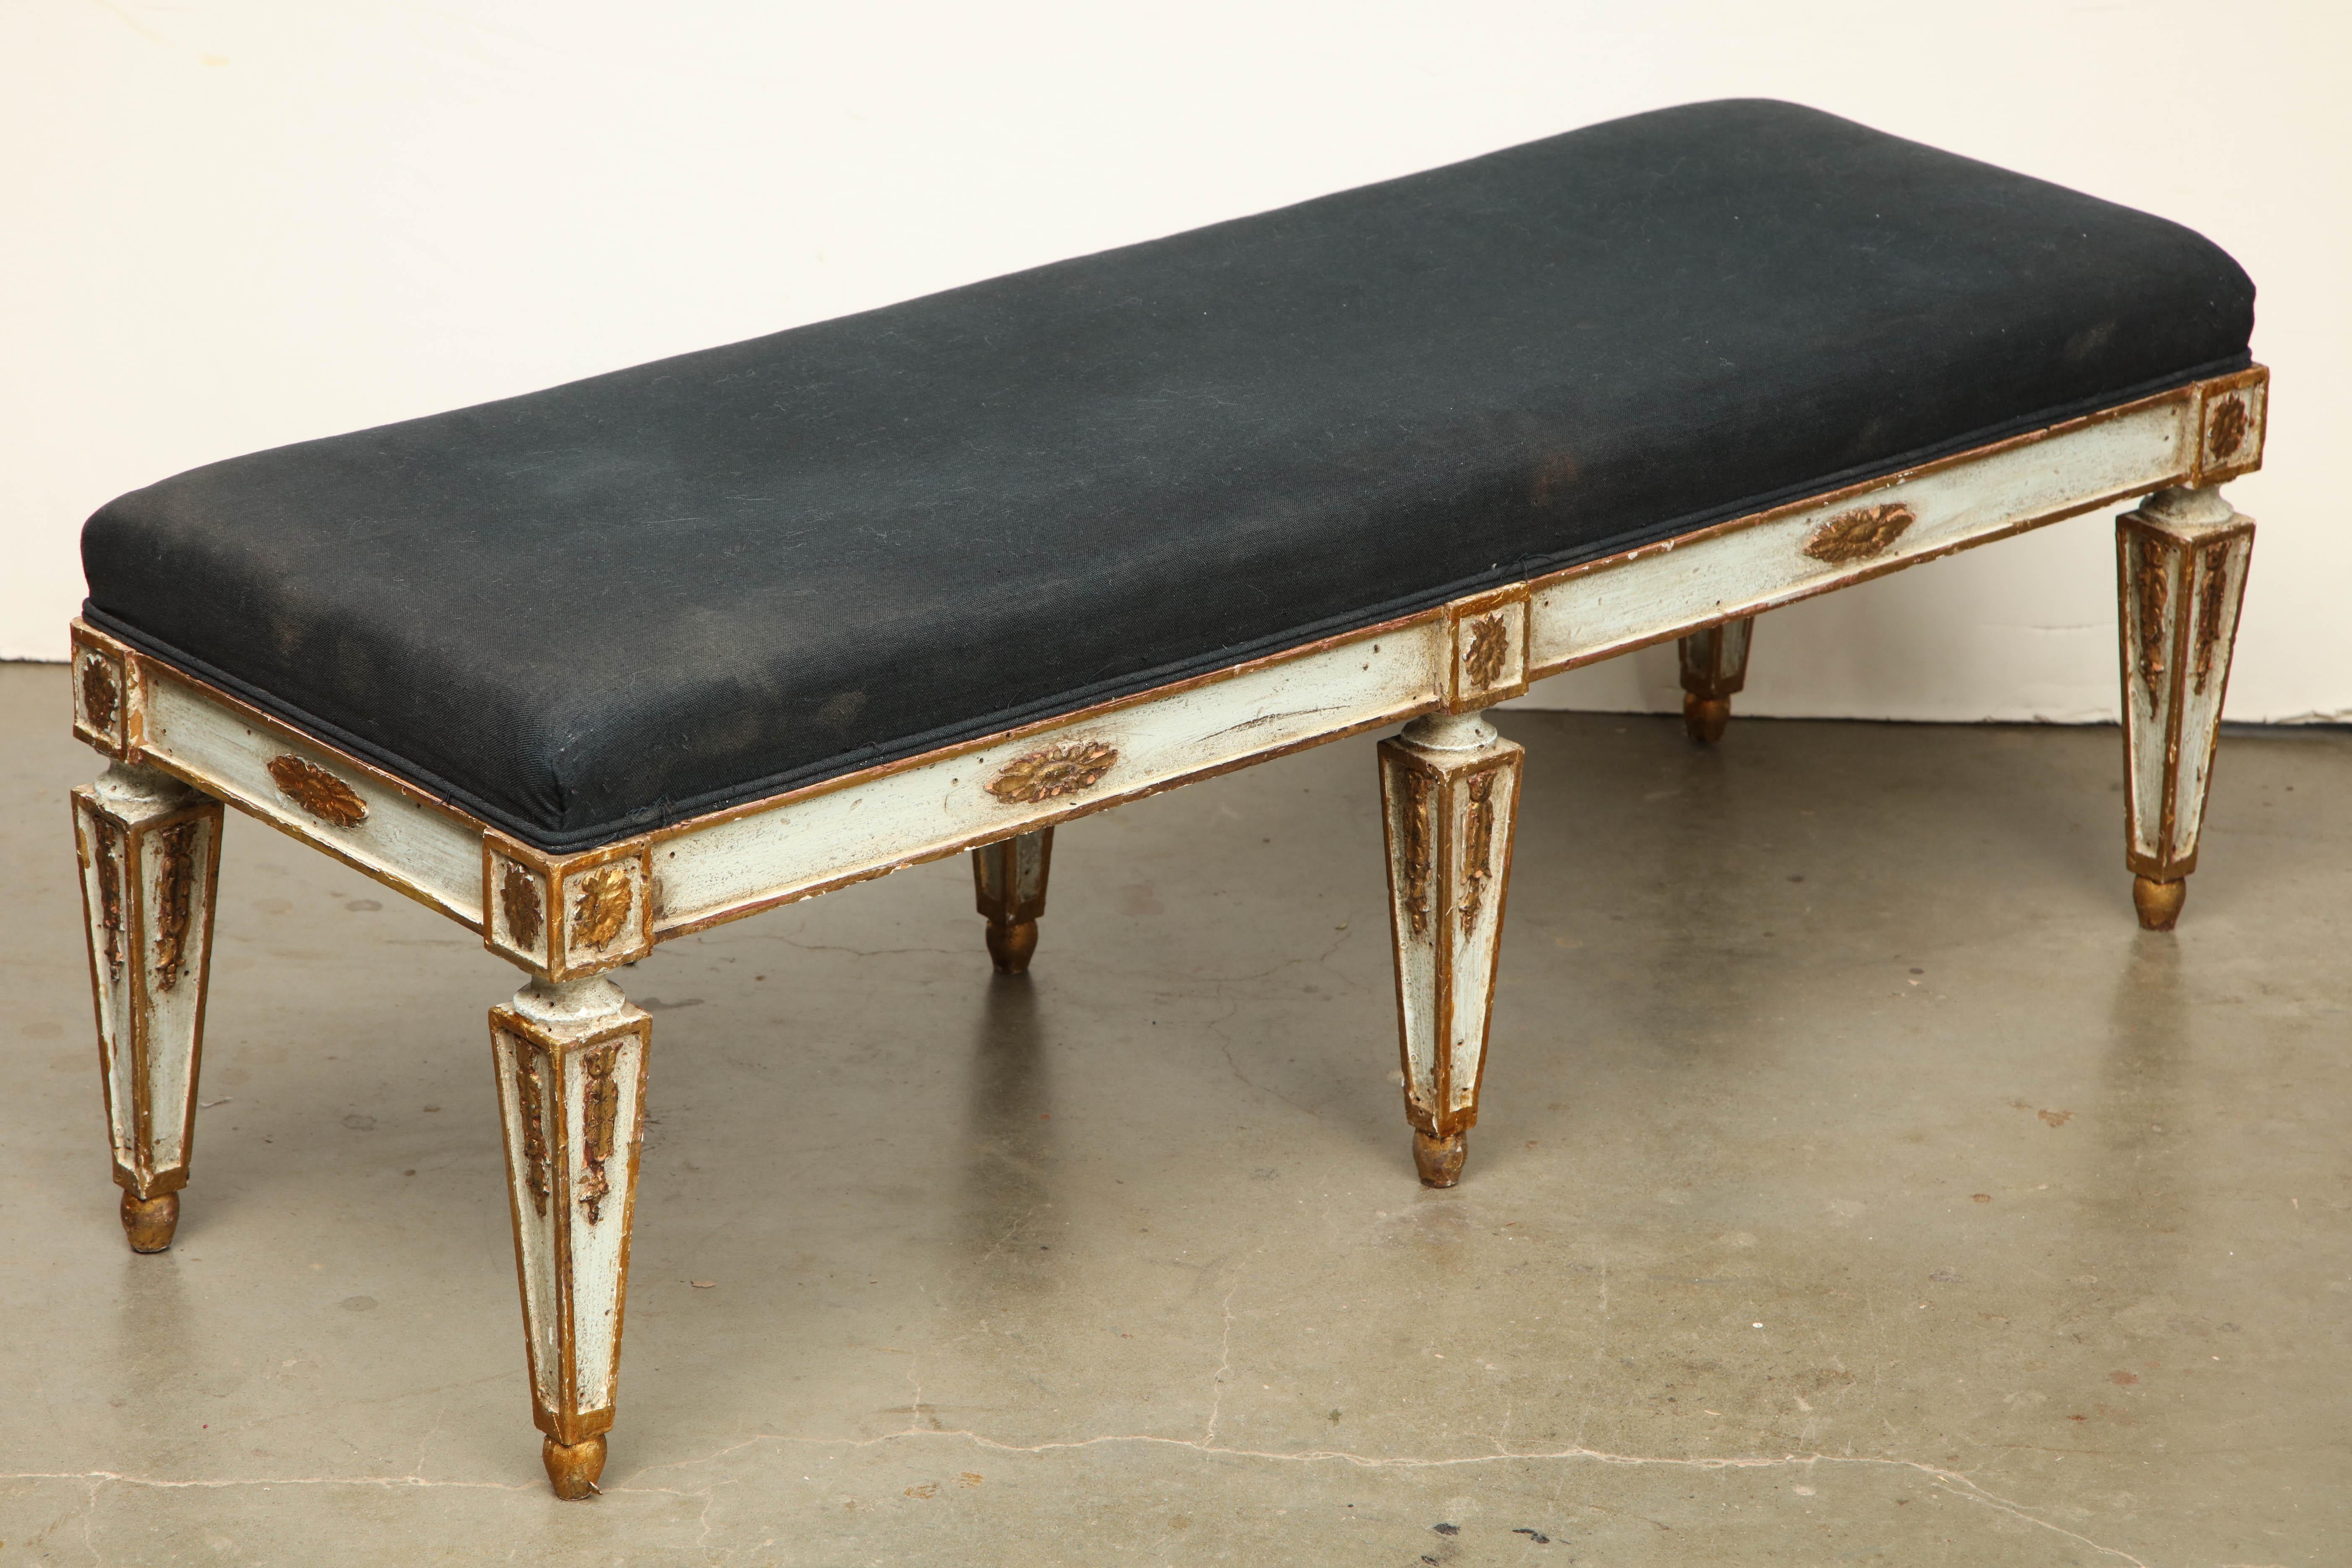 Italian Louis XVI carved parcel-gilt six-legged banquette with upholstered cushion seat.